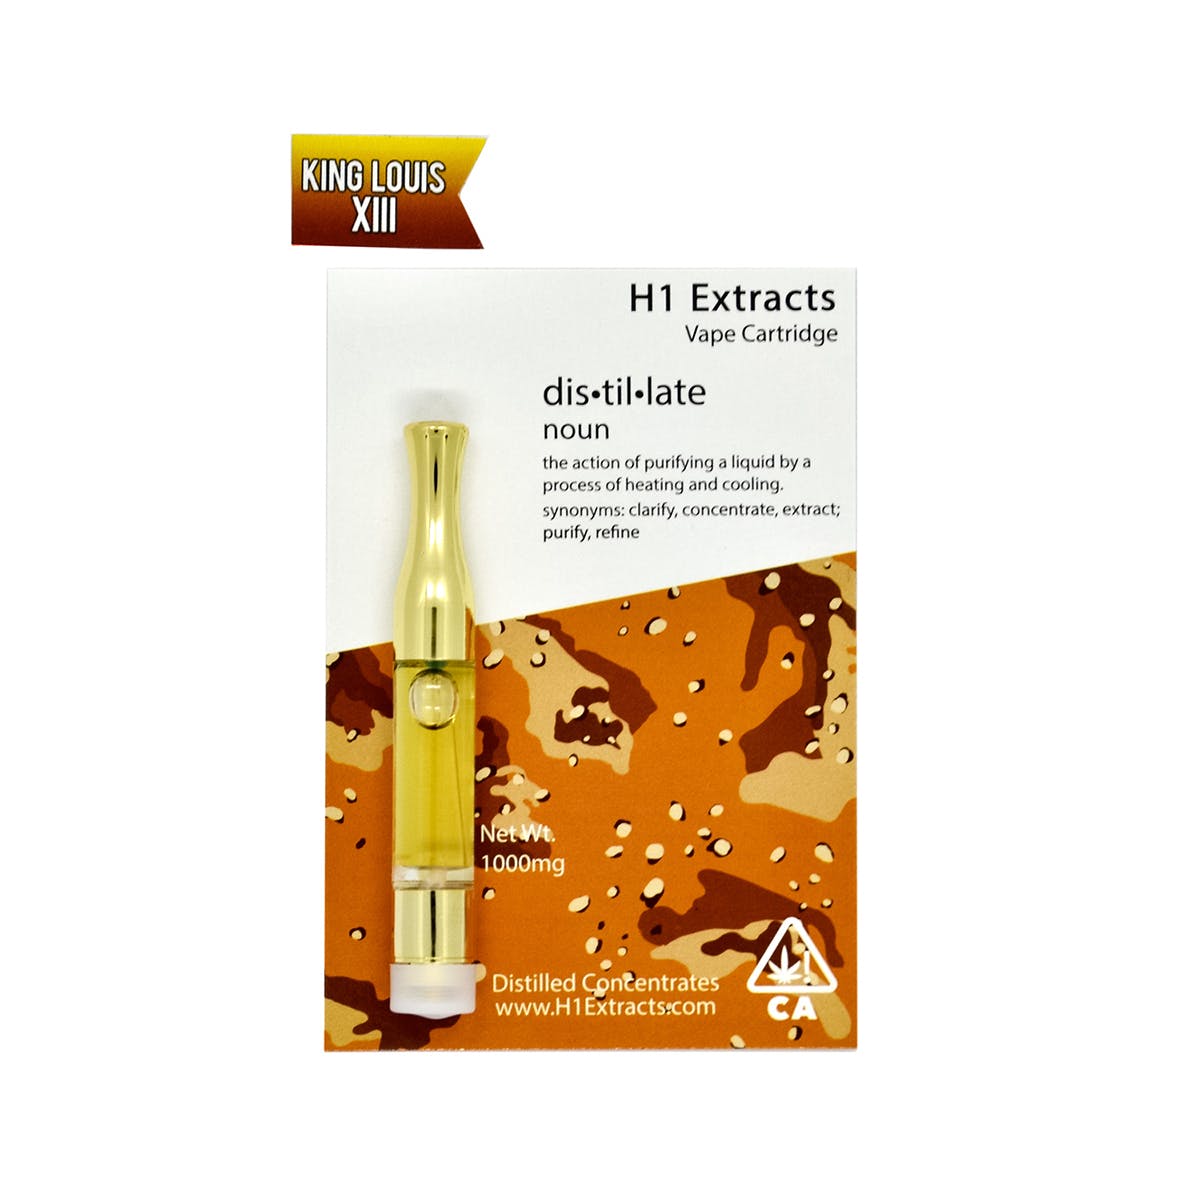 concentrate-h1-extracts-classic-king-louis-xiii-cartridge